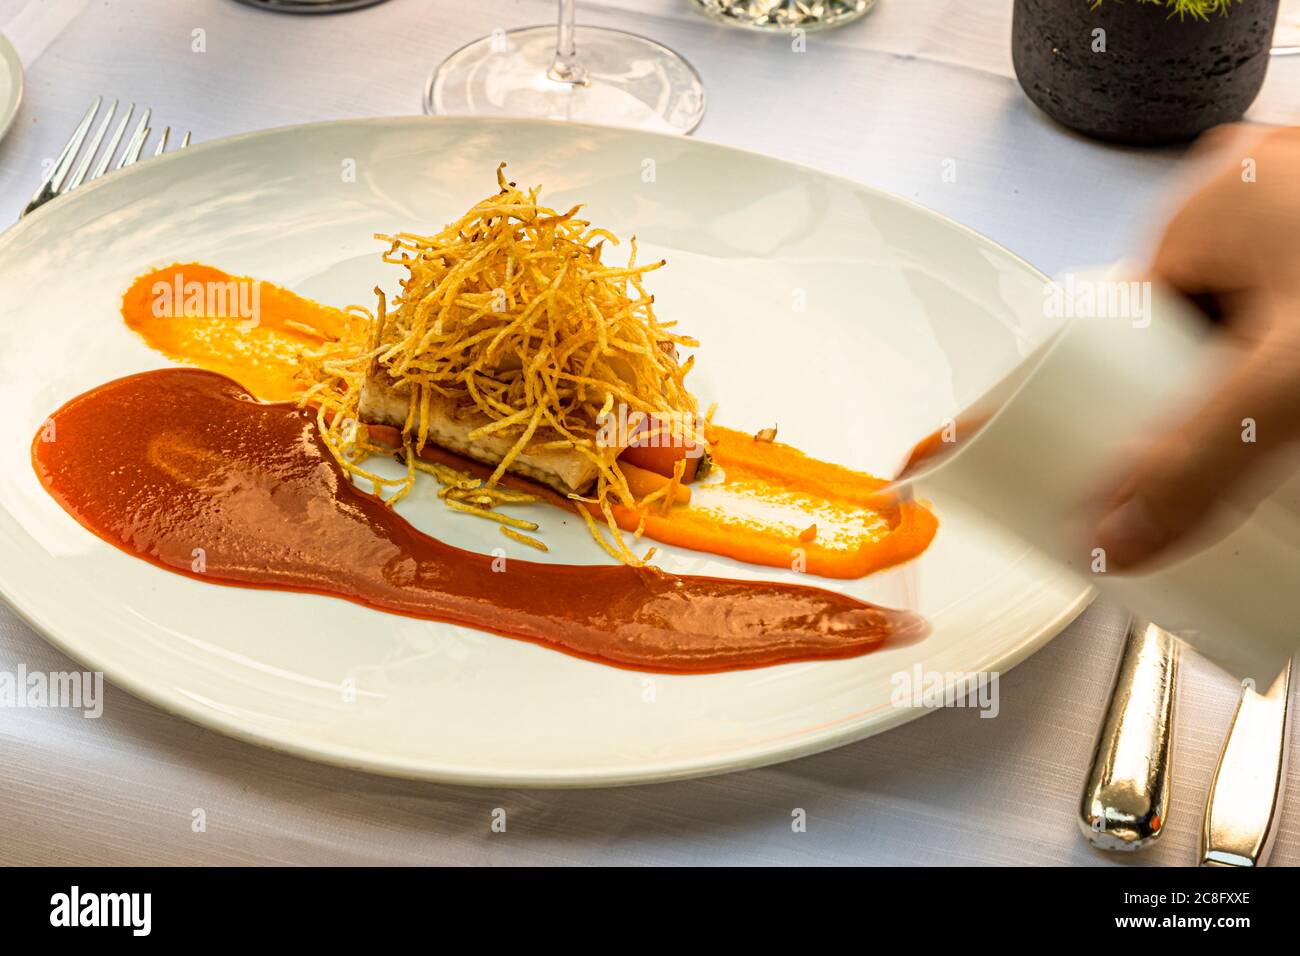 Gourmet Dish by Hotel Krone Chef de cuisine Peter Prüfer in Weil am Rhein, Germany. Fillet of "Wiße Waller" with young carrots, crab broth and potato straw Stock Photo